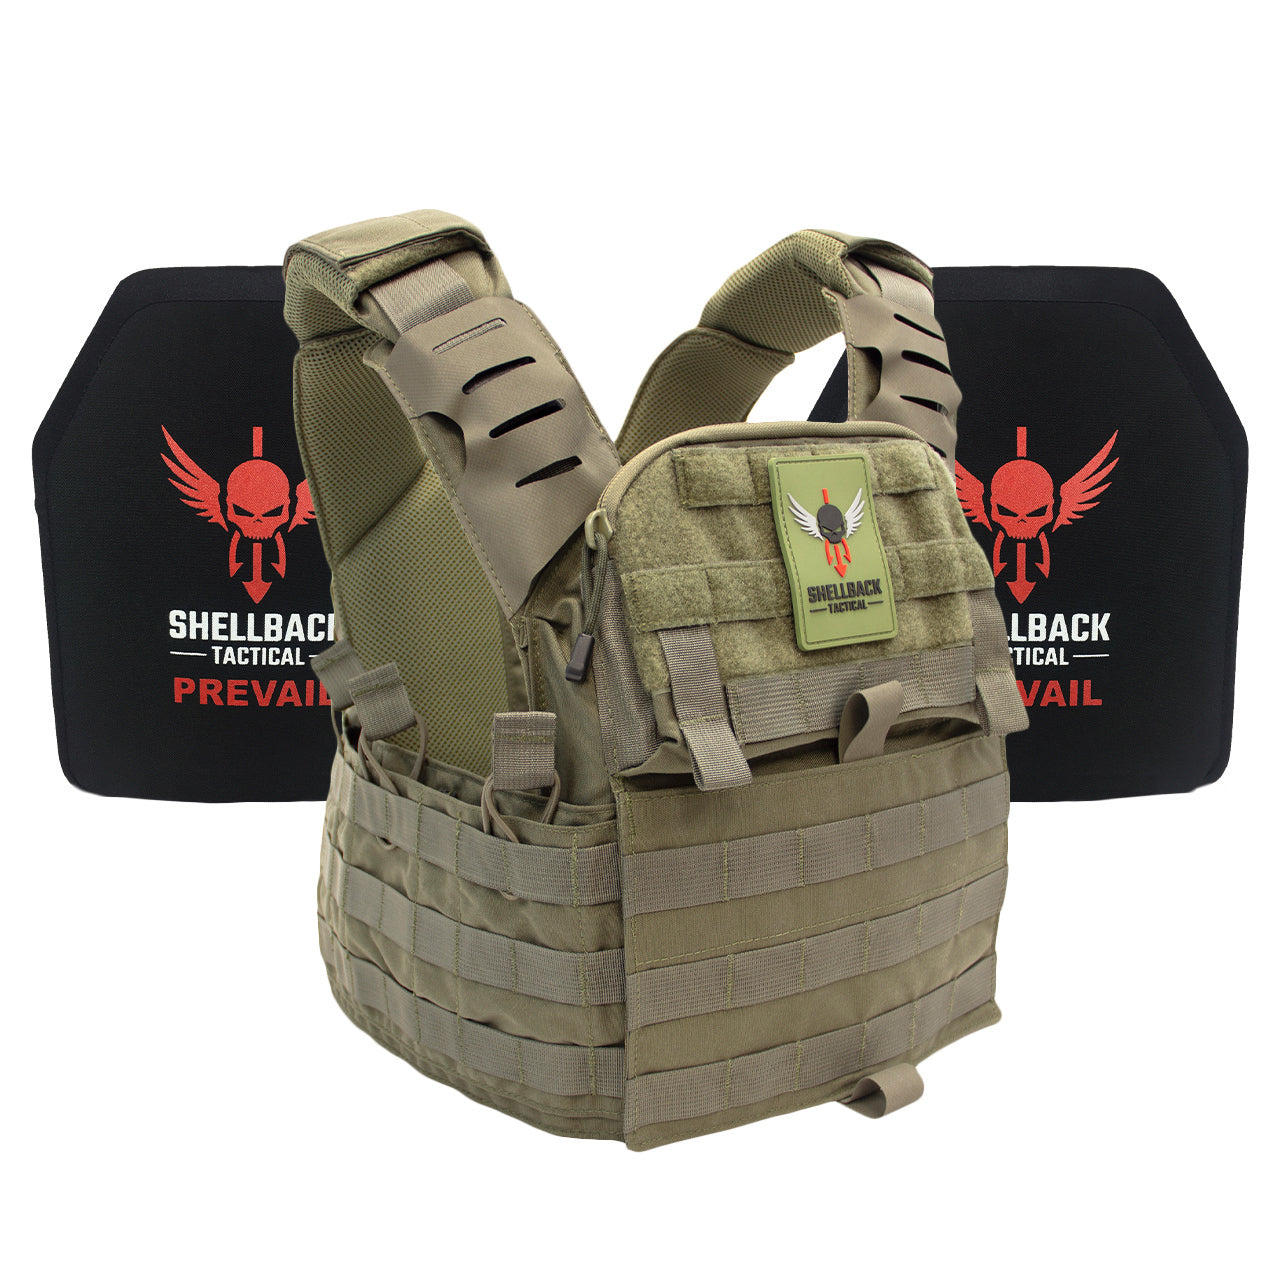 A Shellback Tactical Banshee Elite 2.0 Active Shooter Kit with Level III Single Curve 10 x 12 Hard Armor plate carrier with the word reload on it.